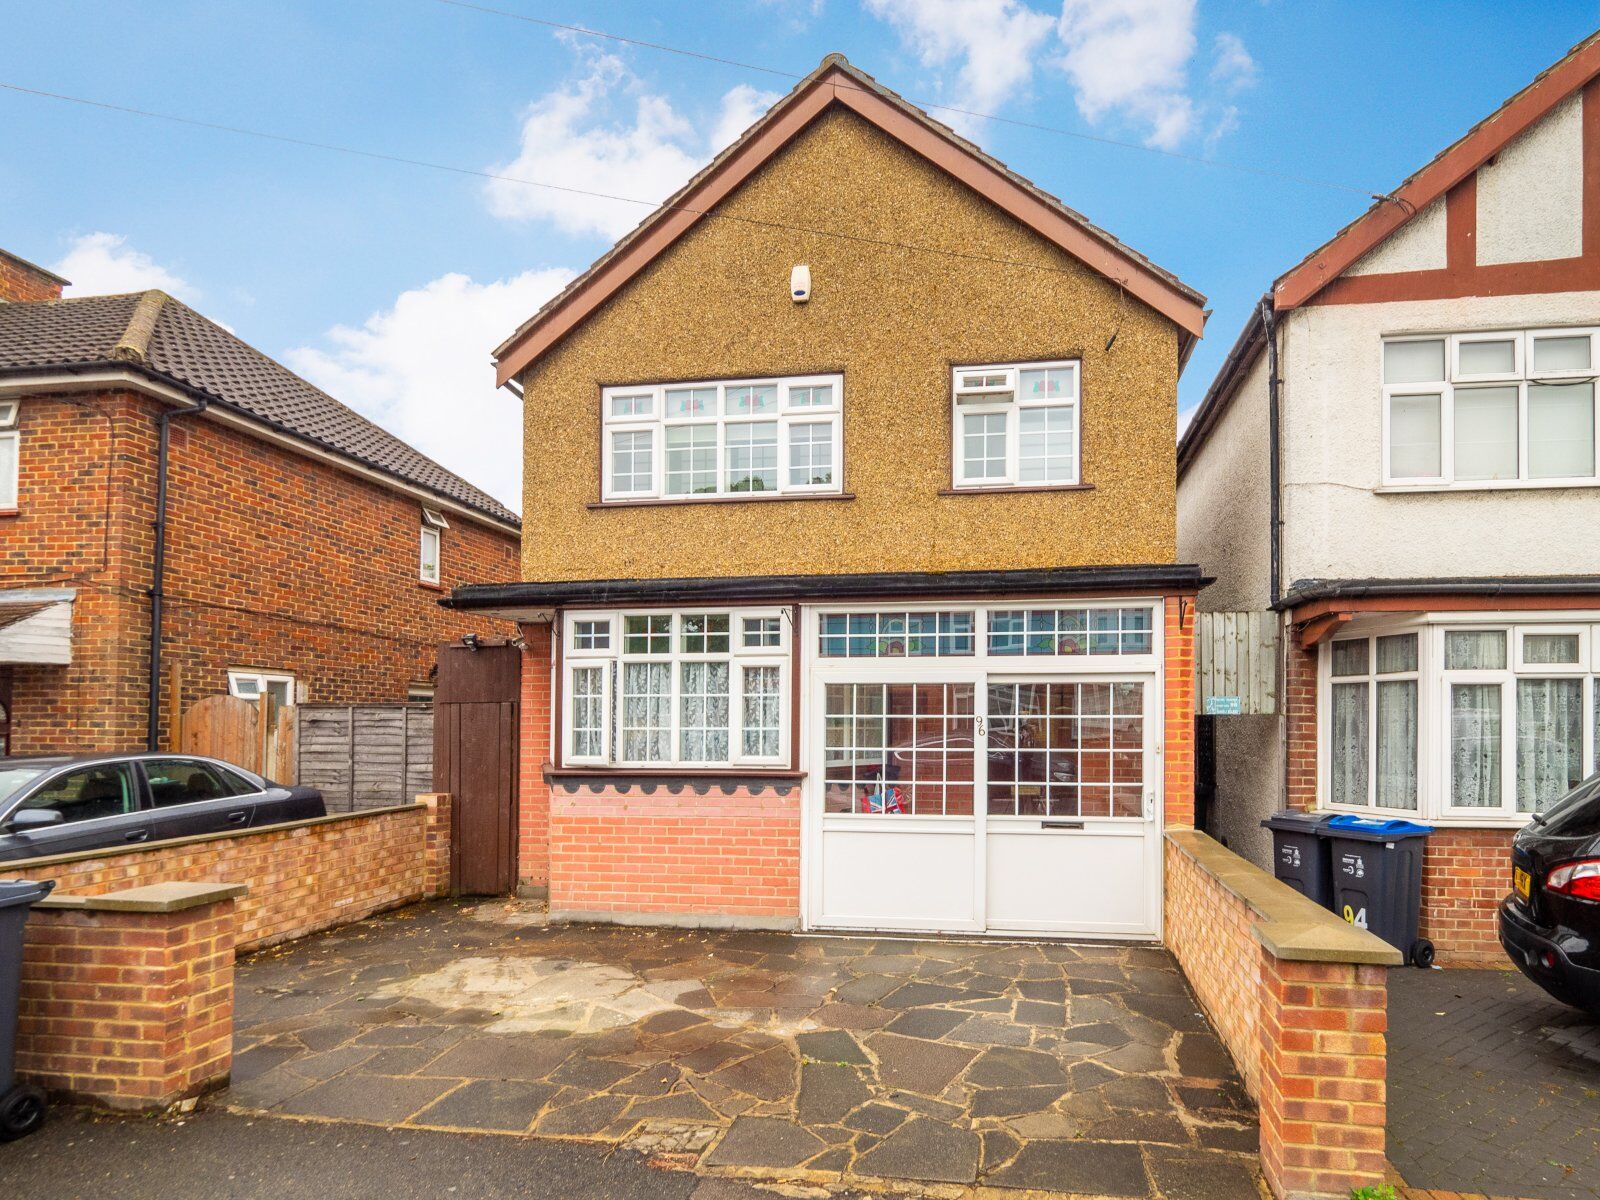 3 bedroom detached house for sale Meopham Road, Mitcham, CR4, main image